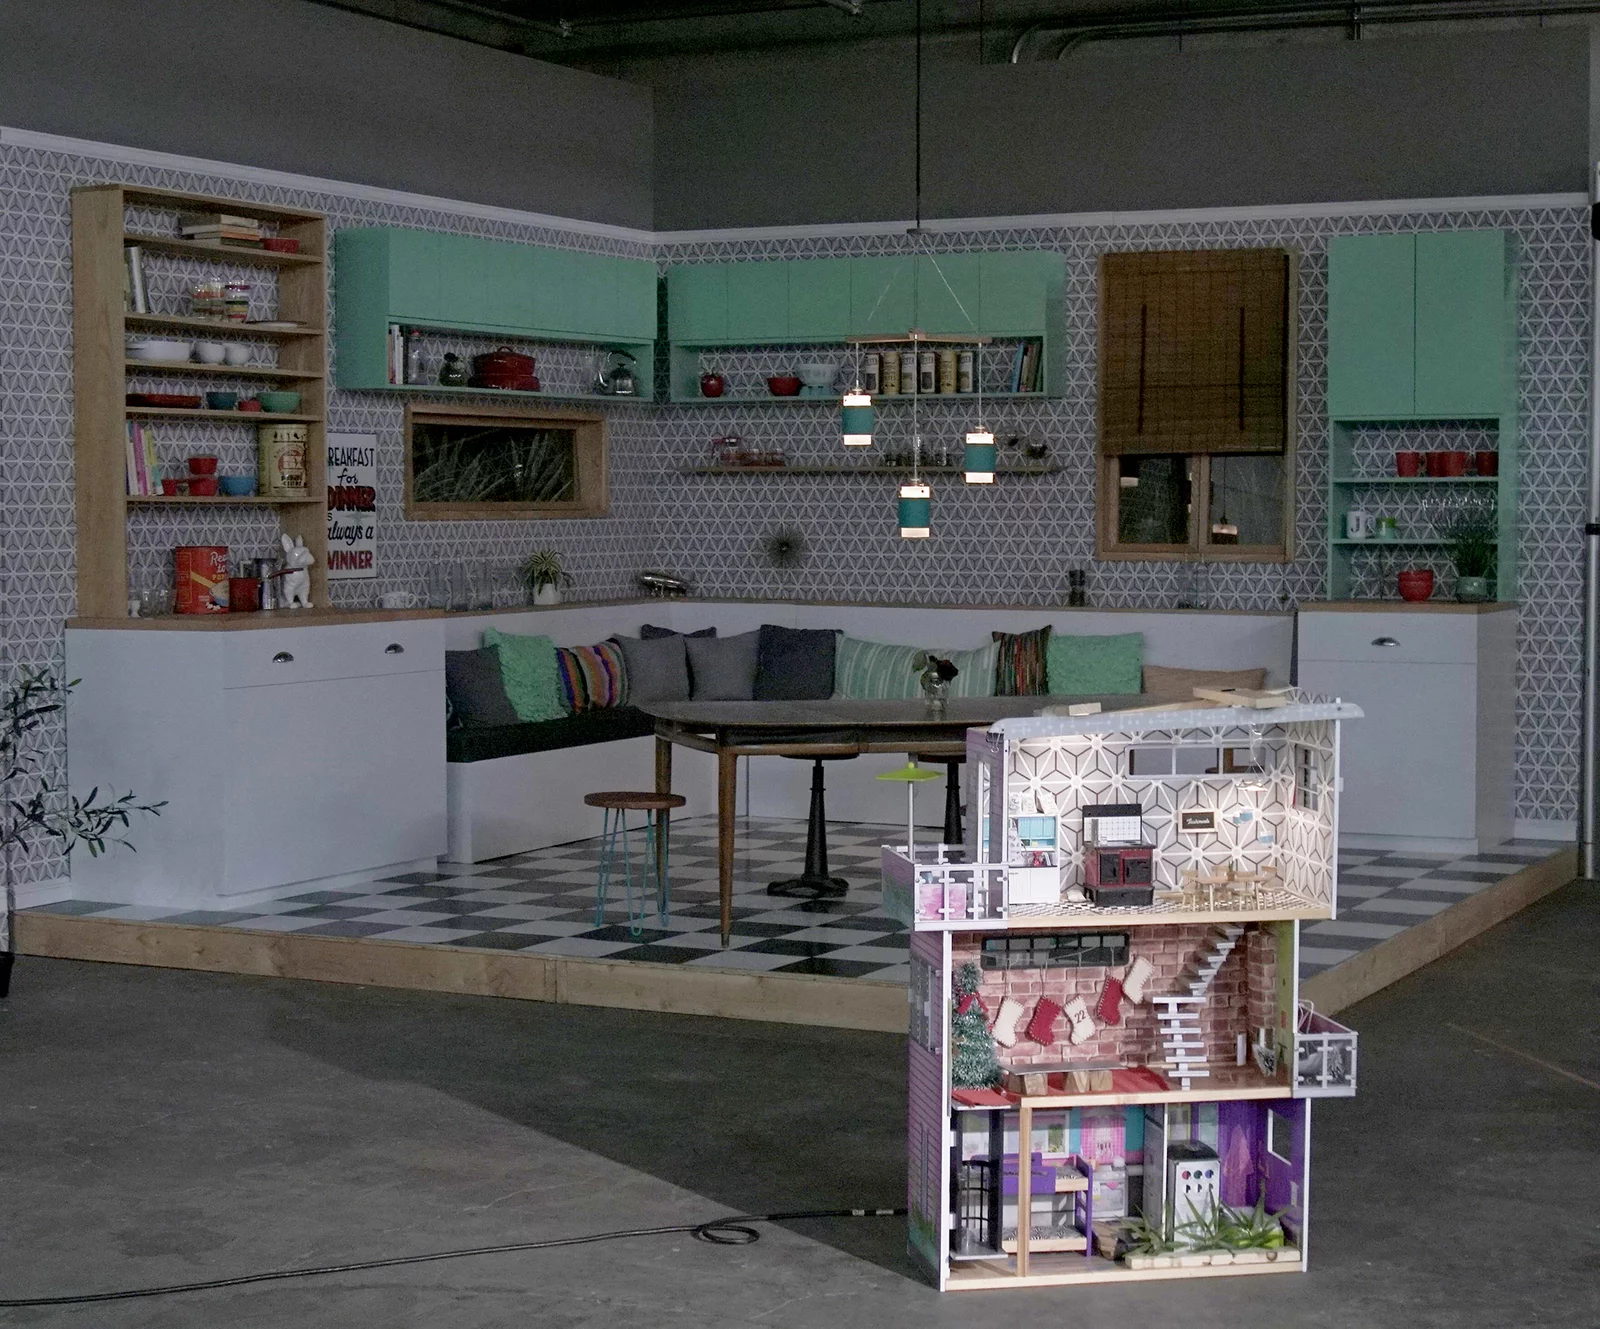 On a soundstage, a kitchen set is in the back whereas in the foreground a dollhouse sits off the soundstage.